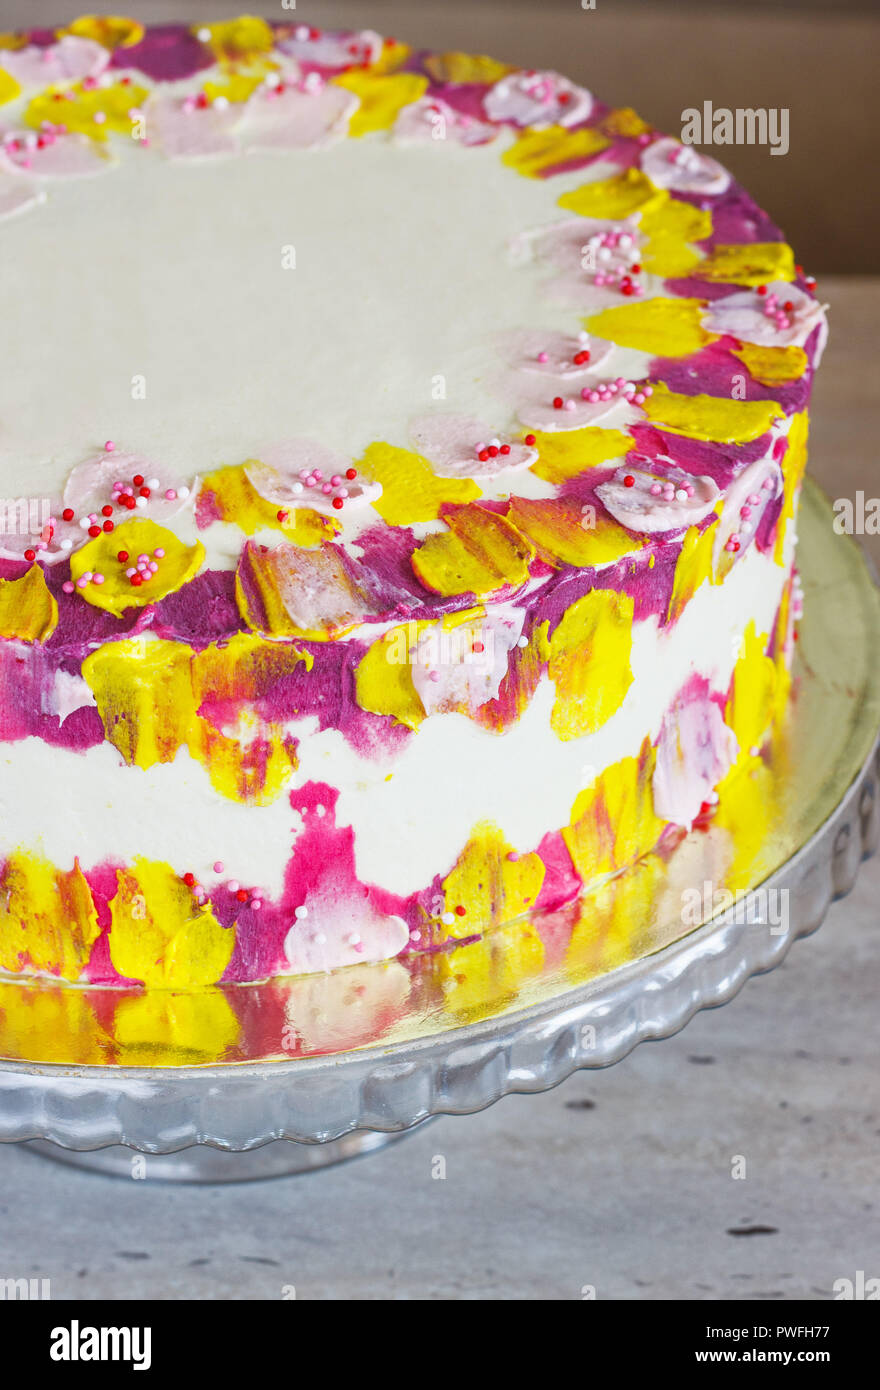 Charlotte Eclair Birthday Cake Garnished With Fresh Flowers, Waffle  Butterflies And Gold Topper, Tied With A White Ribbon, On White Background.  Stock Photo, Picture and Royalty Free Image. Image 174667061.